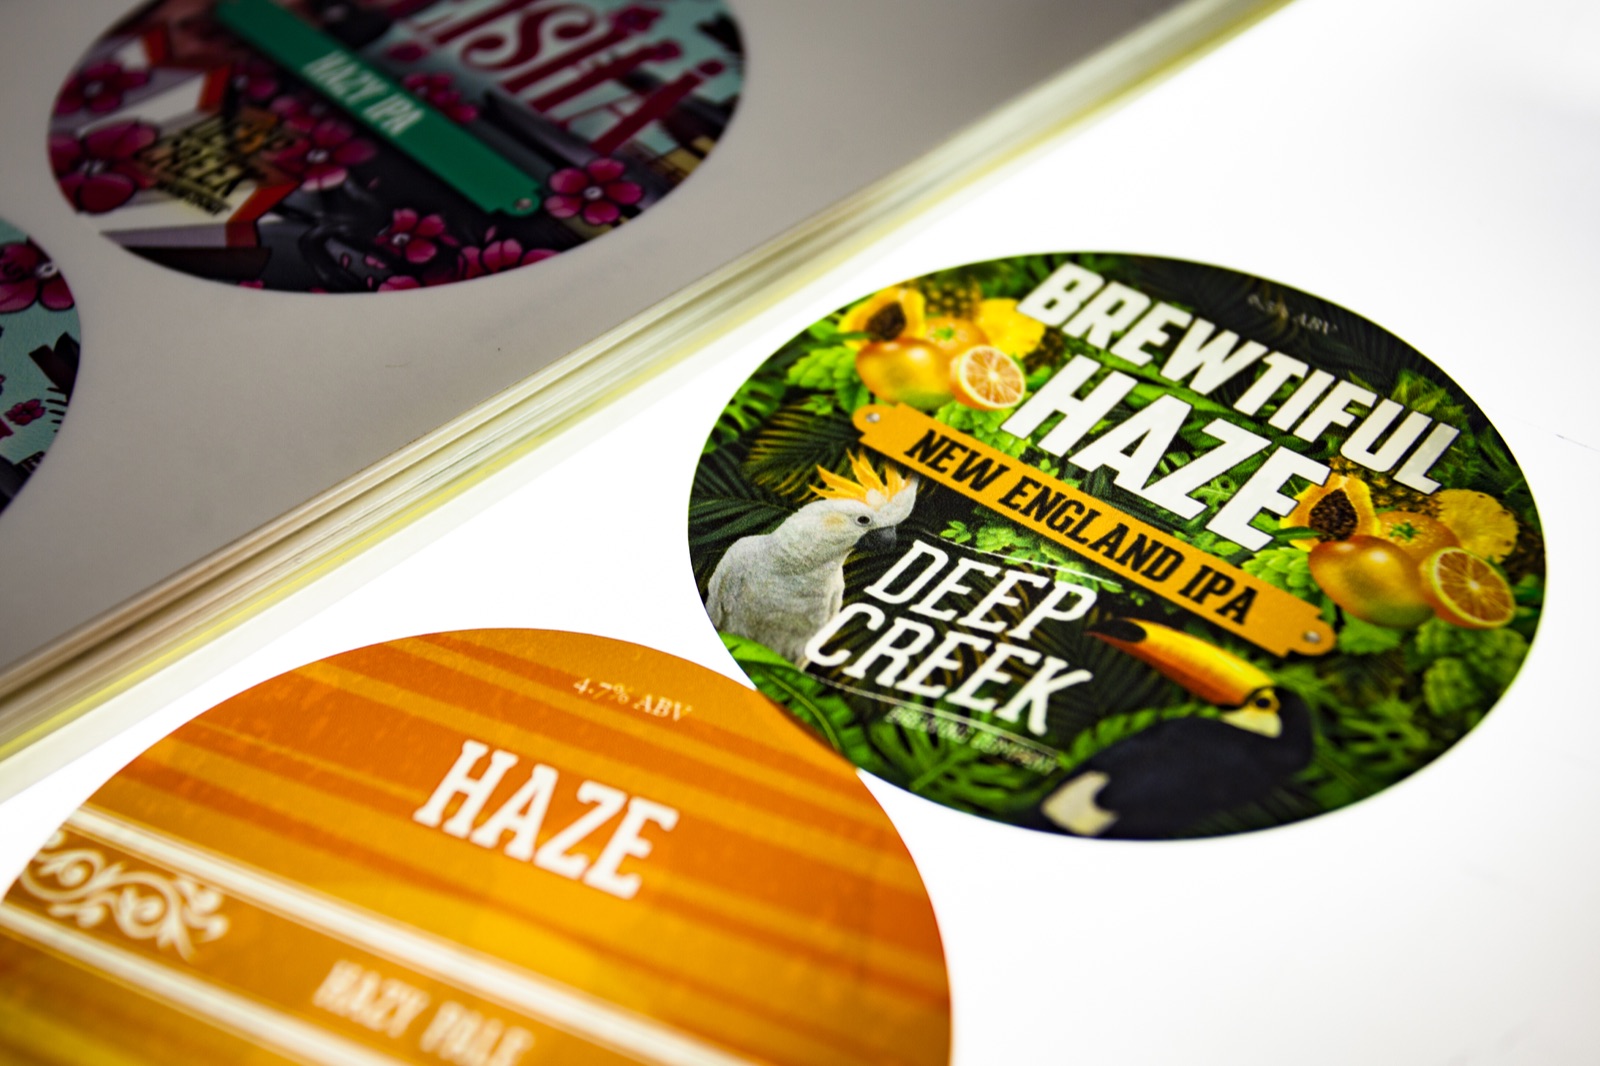 Printing backlit tap badges for the Deep Creek Brewing Co.